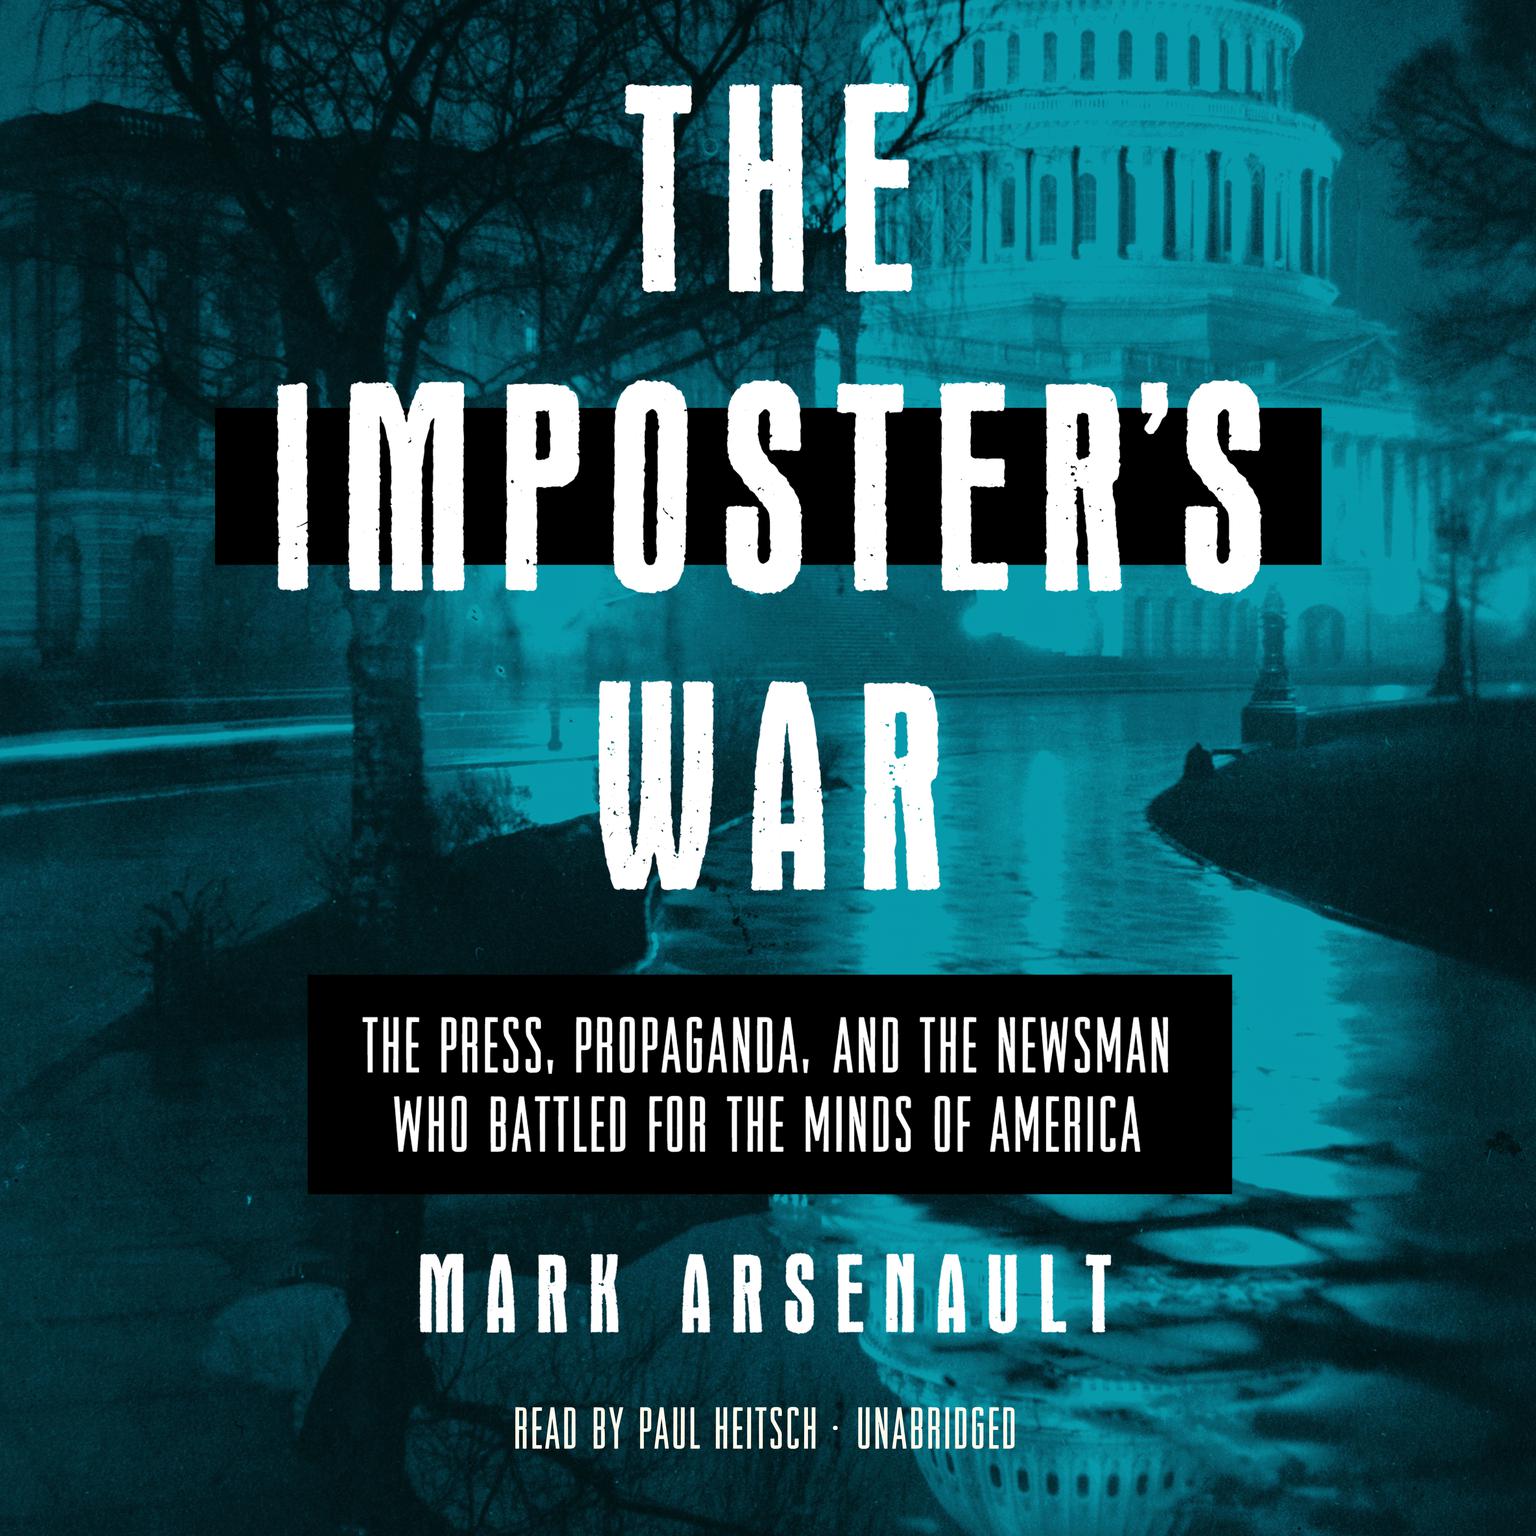 The Imposters War: The Press, Propaganda, and the Newsman Who Battled for the Minds of America  Audiobook, by Mark Arsenault